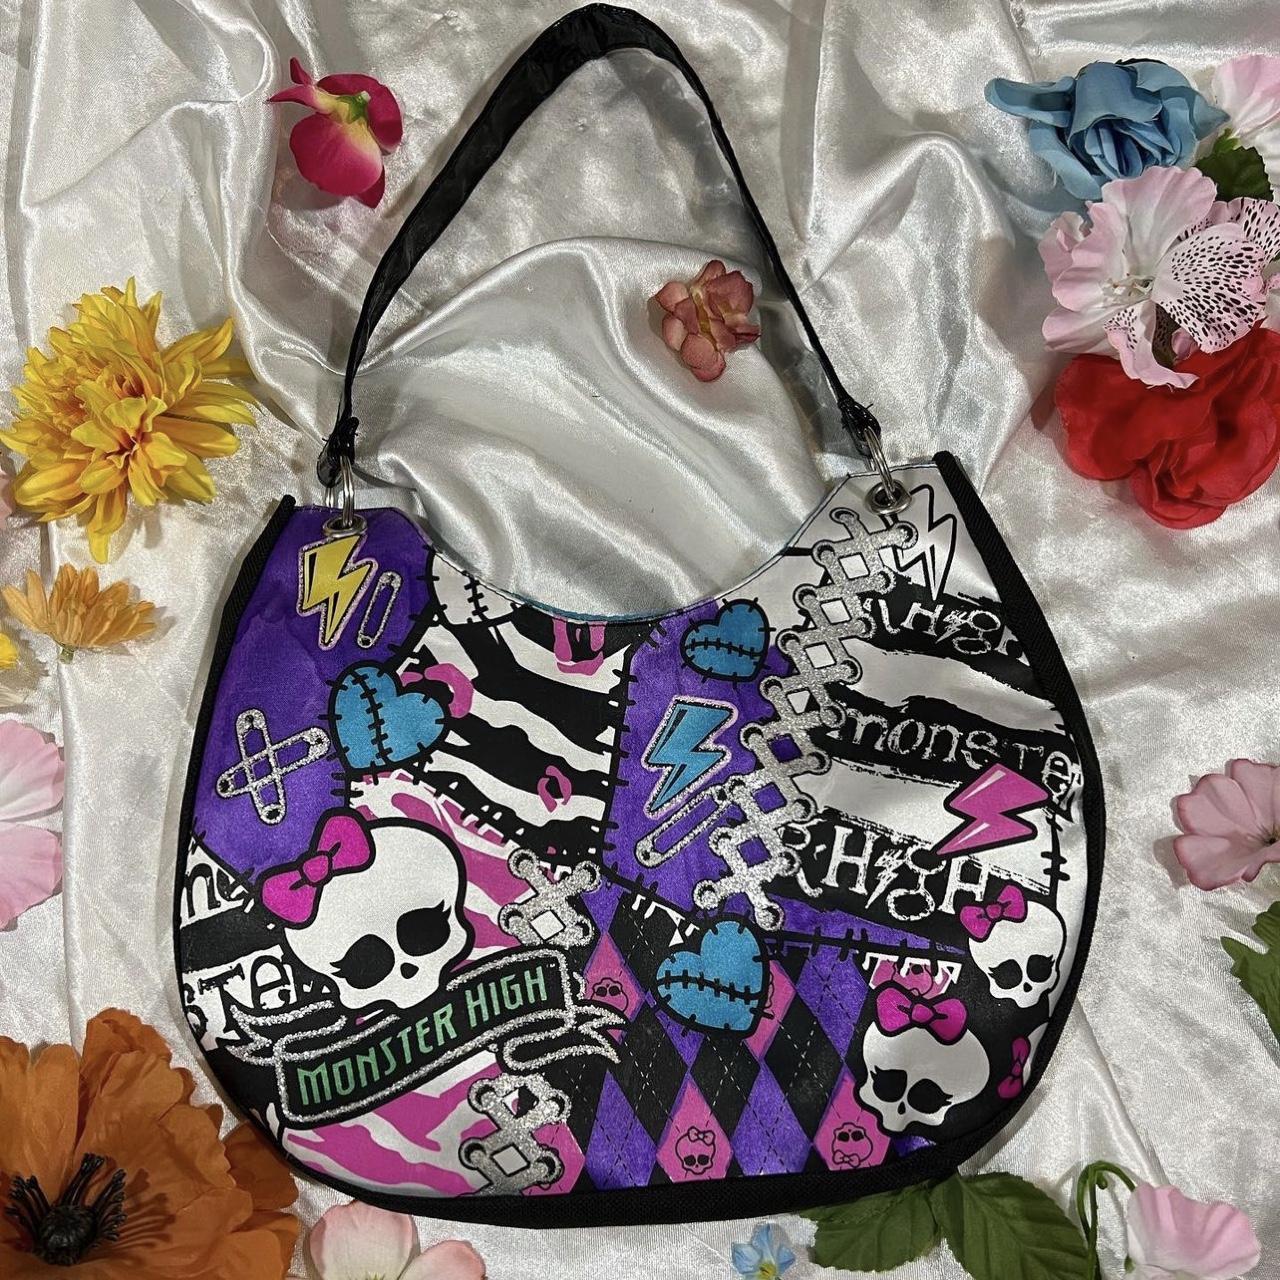 Backpack purse at Hot Topic in-stock (Woodlands Mall, TX) : r/MonsterHigh